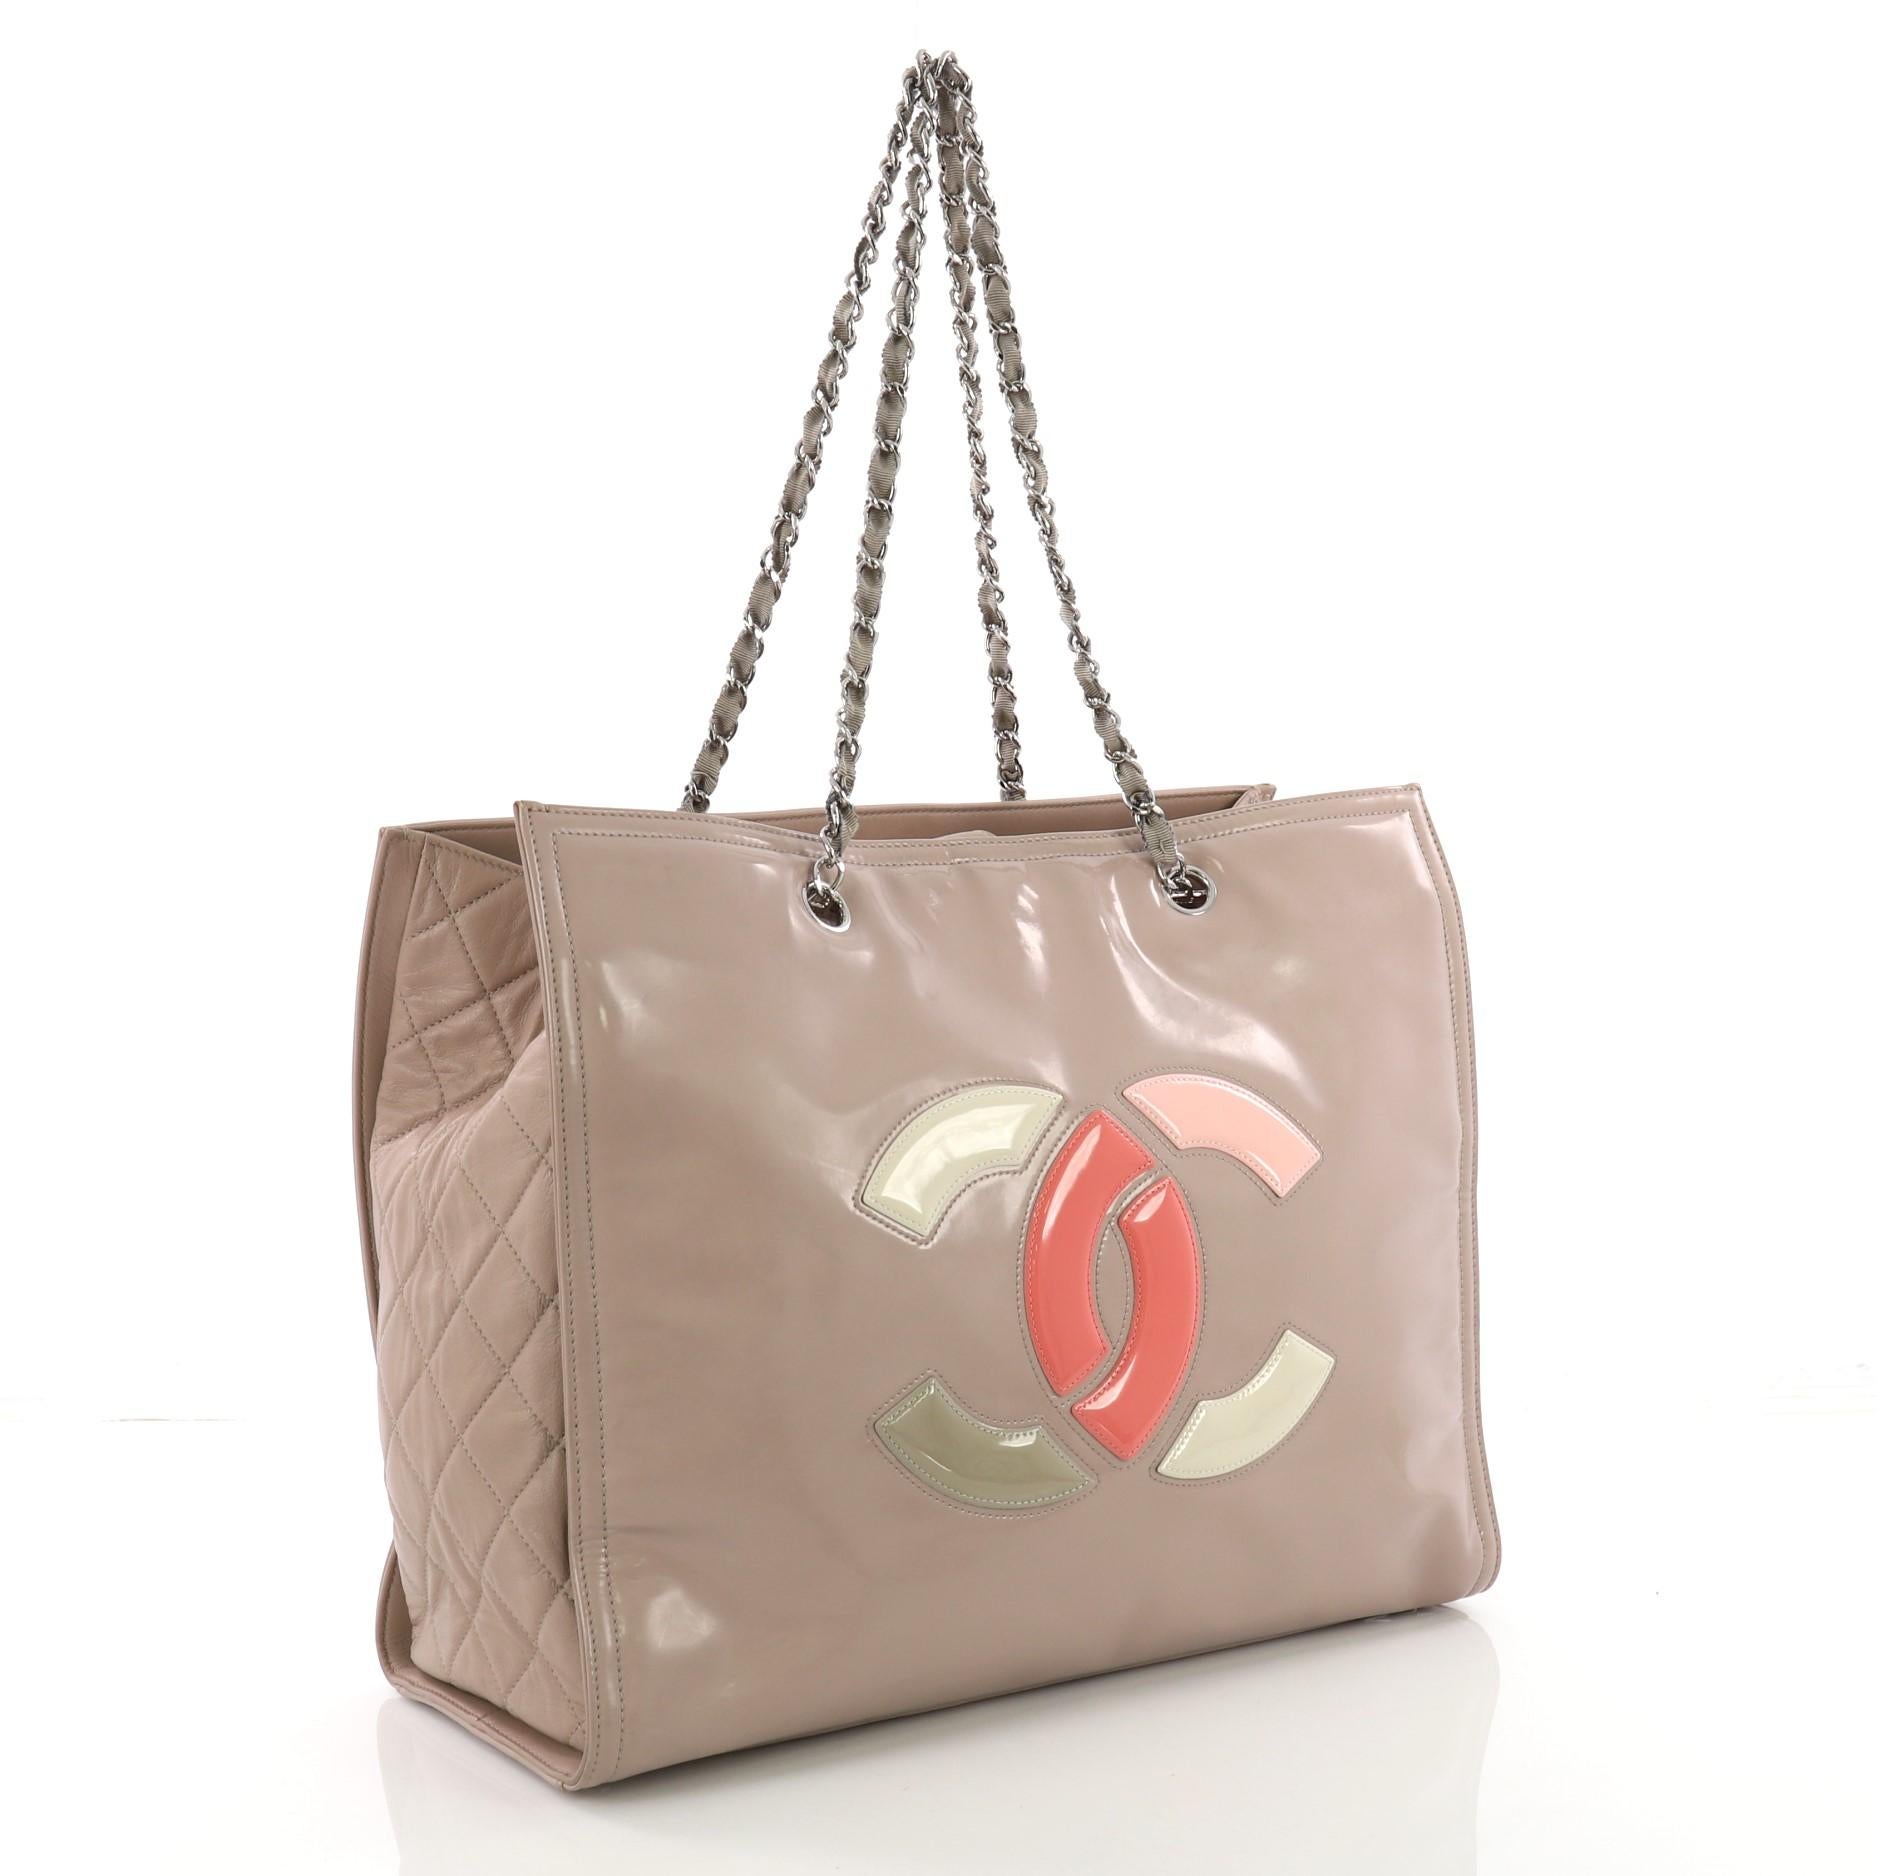 Brown Chanel Lipstick Open Tote Patent Vinyl Large